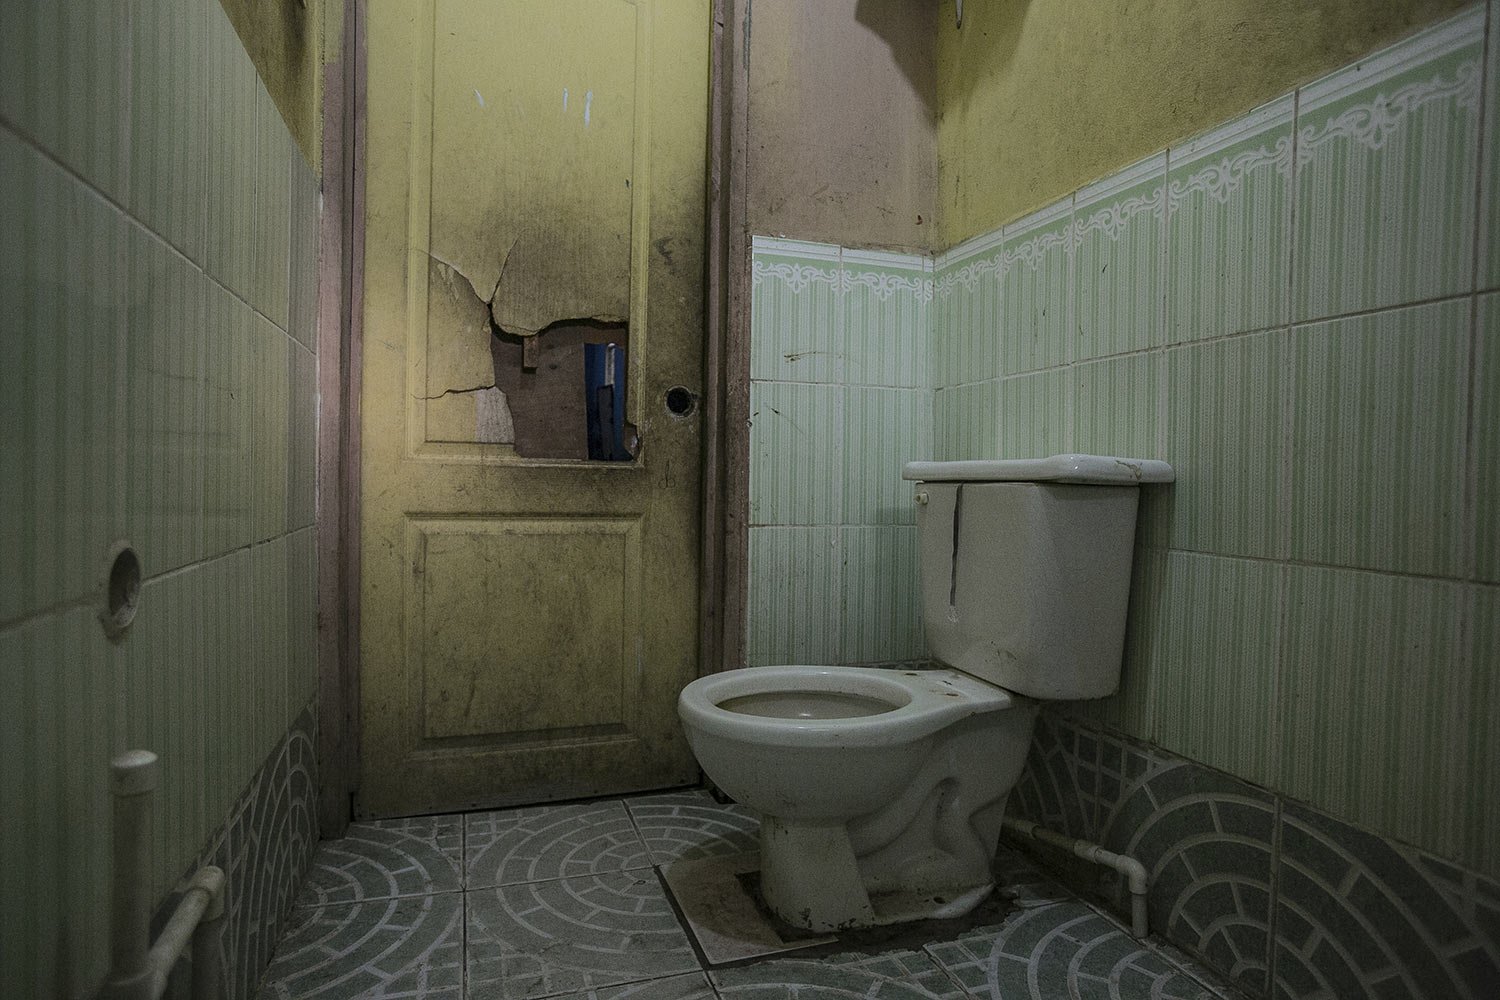  A view of the bathroom of a woman who said she aborted here in an undisclosed town in northern Honduras, March 10, 2023. The woman, who does not want to be identified because abortion is illegal in Honduras under all circumstances, said she took abo